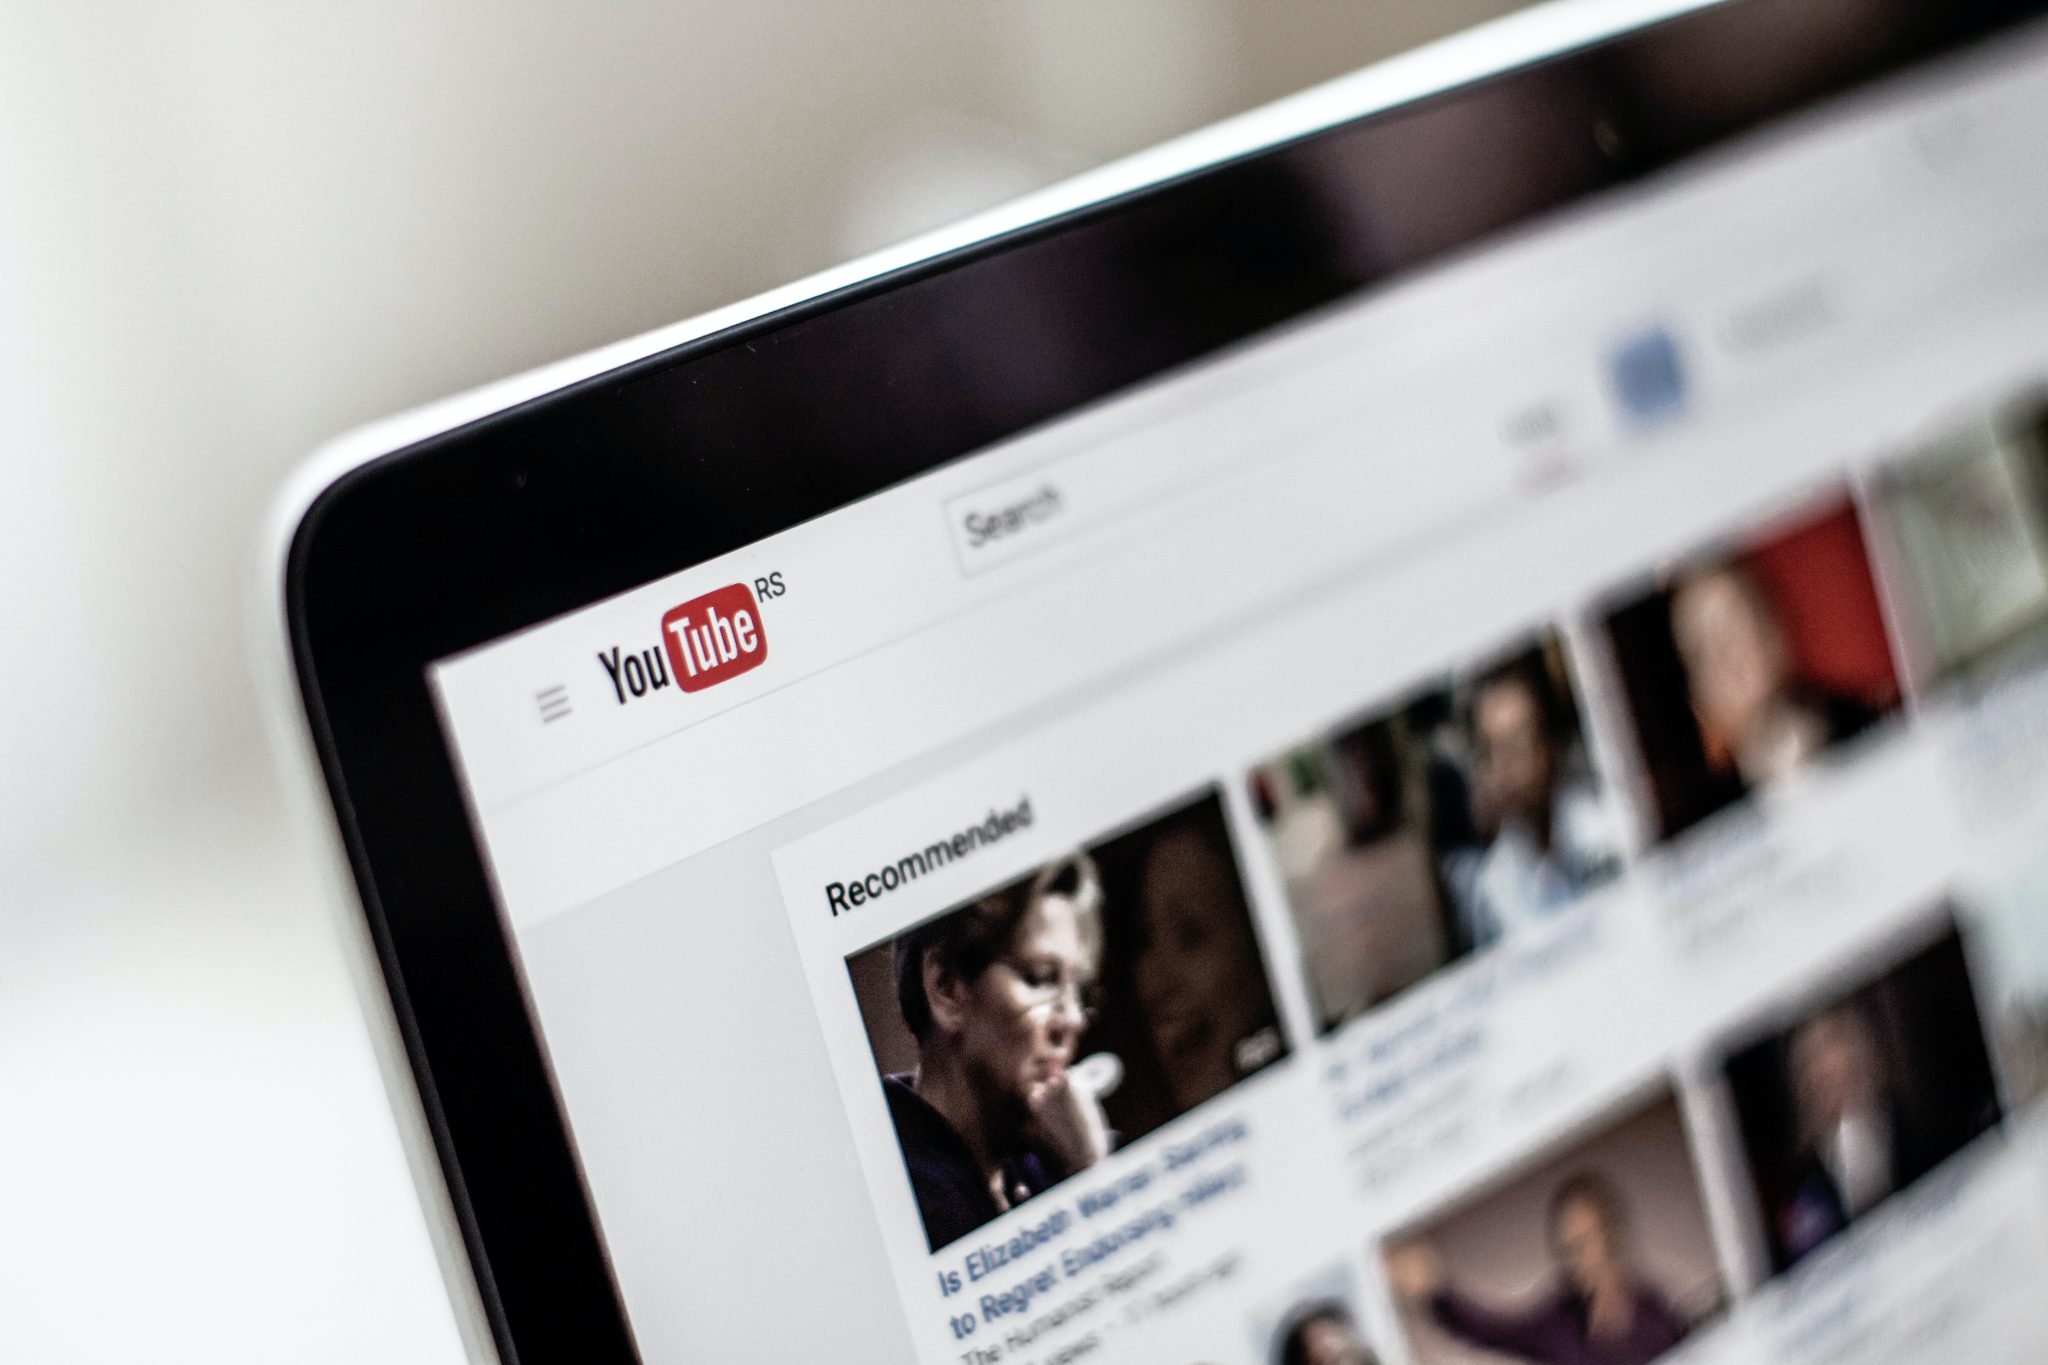 YouTube SEO: How to Optimize Videos for YouTube Search